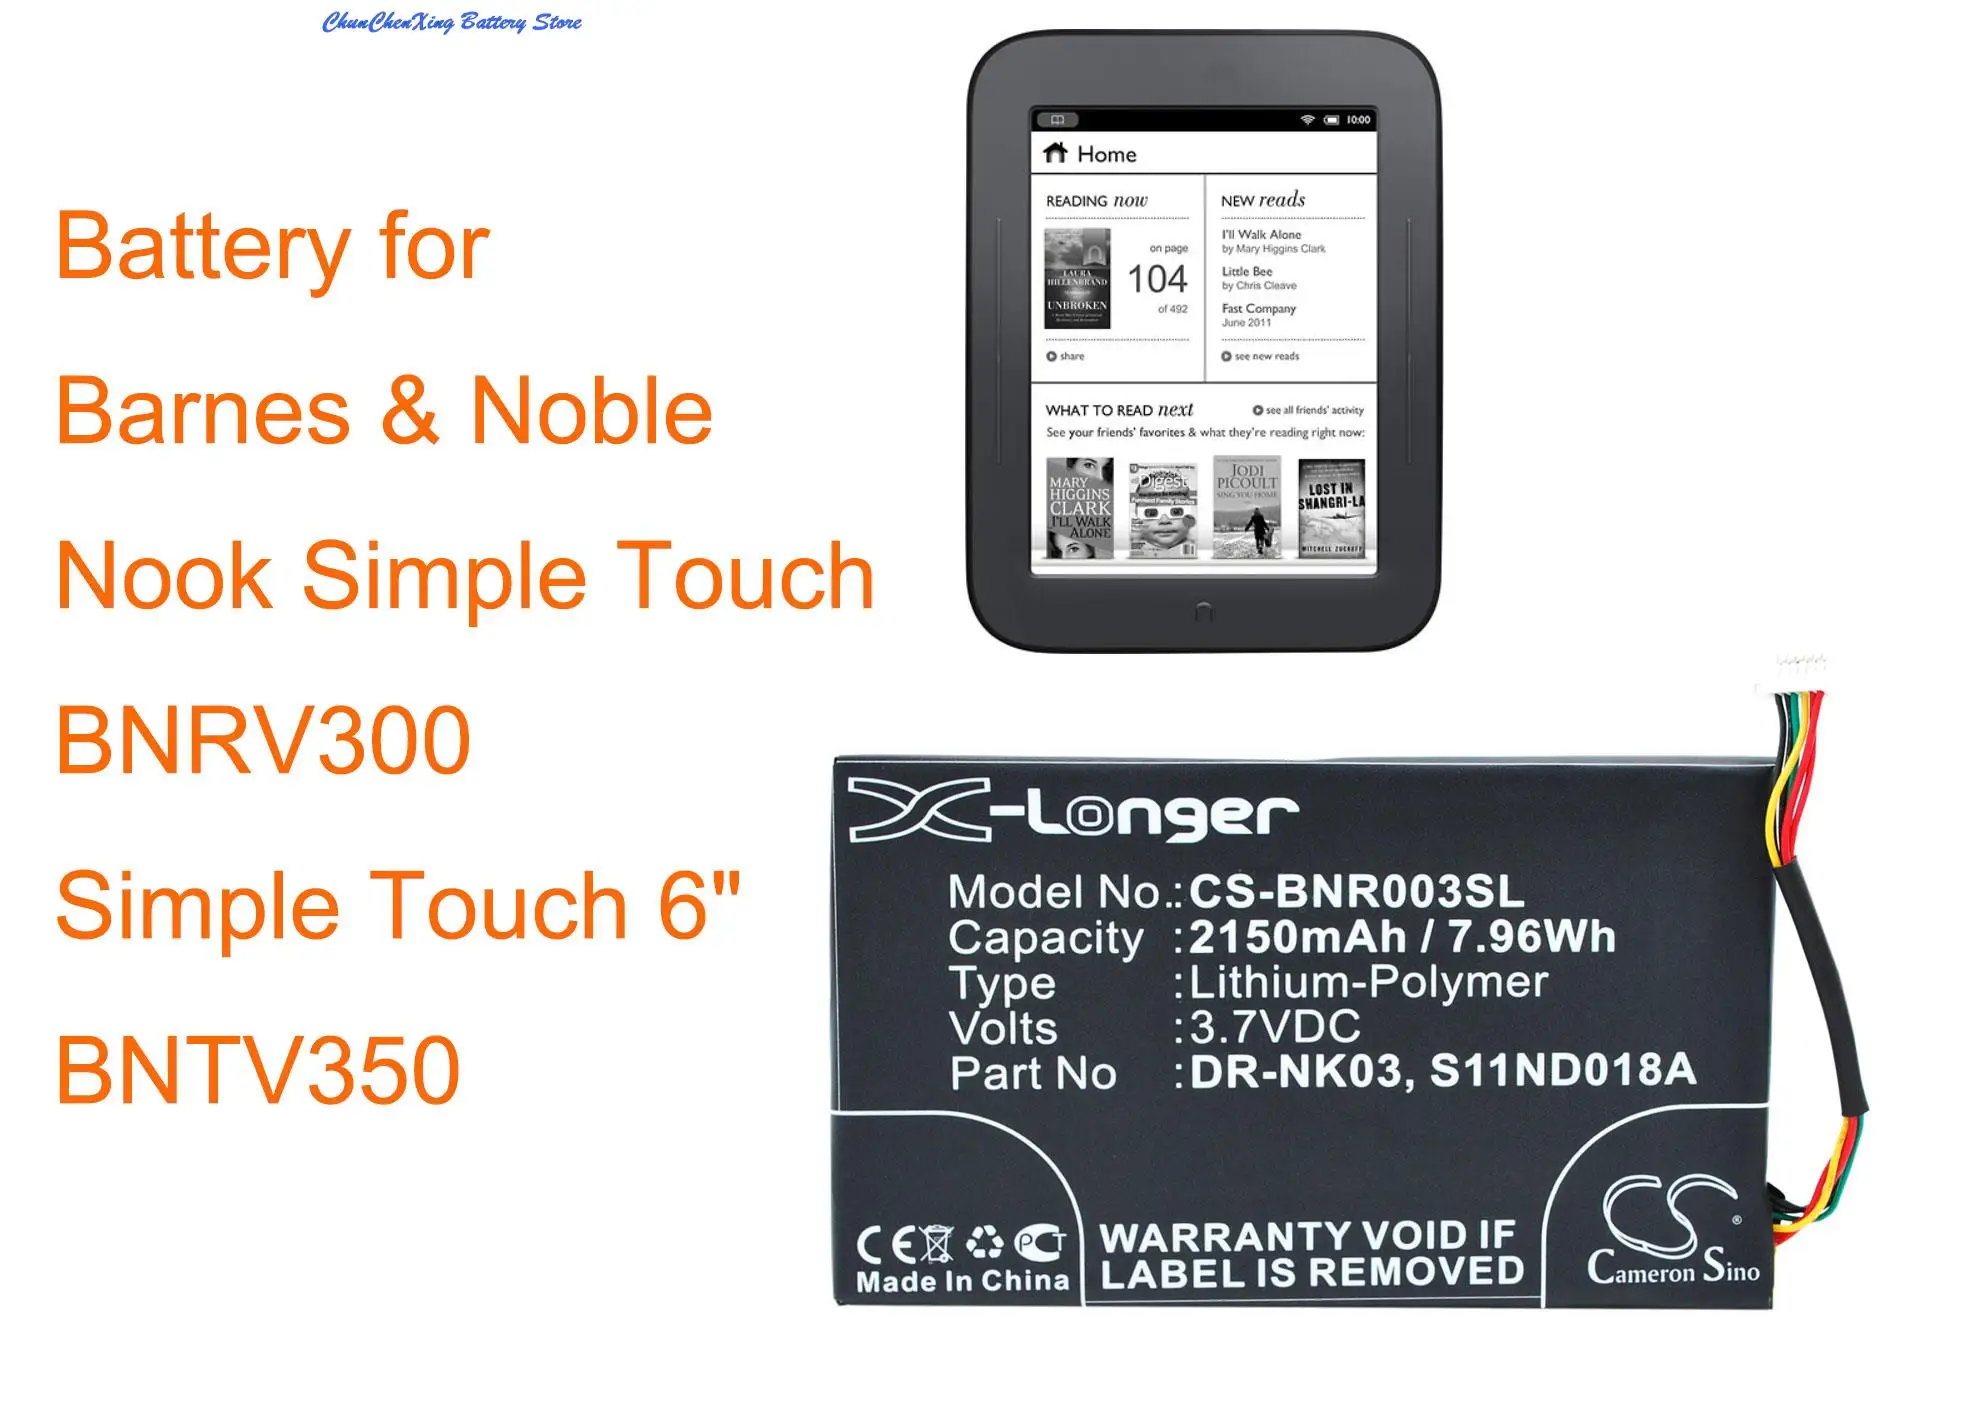 Cameron Sino 2150mAh Battery DR-NK03,S11ND018A for Barnes&Noble BNRV300,BNTV350,Nook Simple Touch, Simple Touch 6",